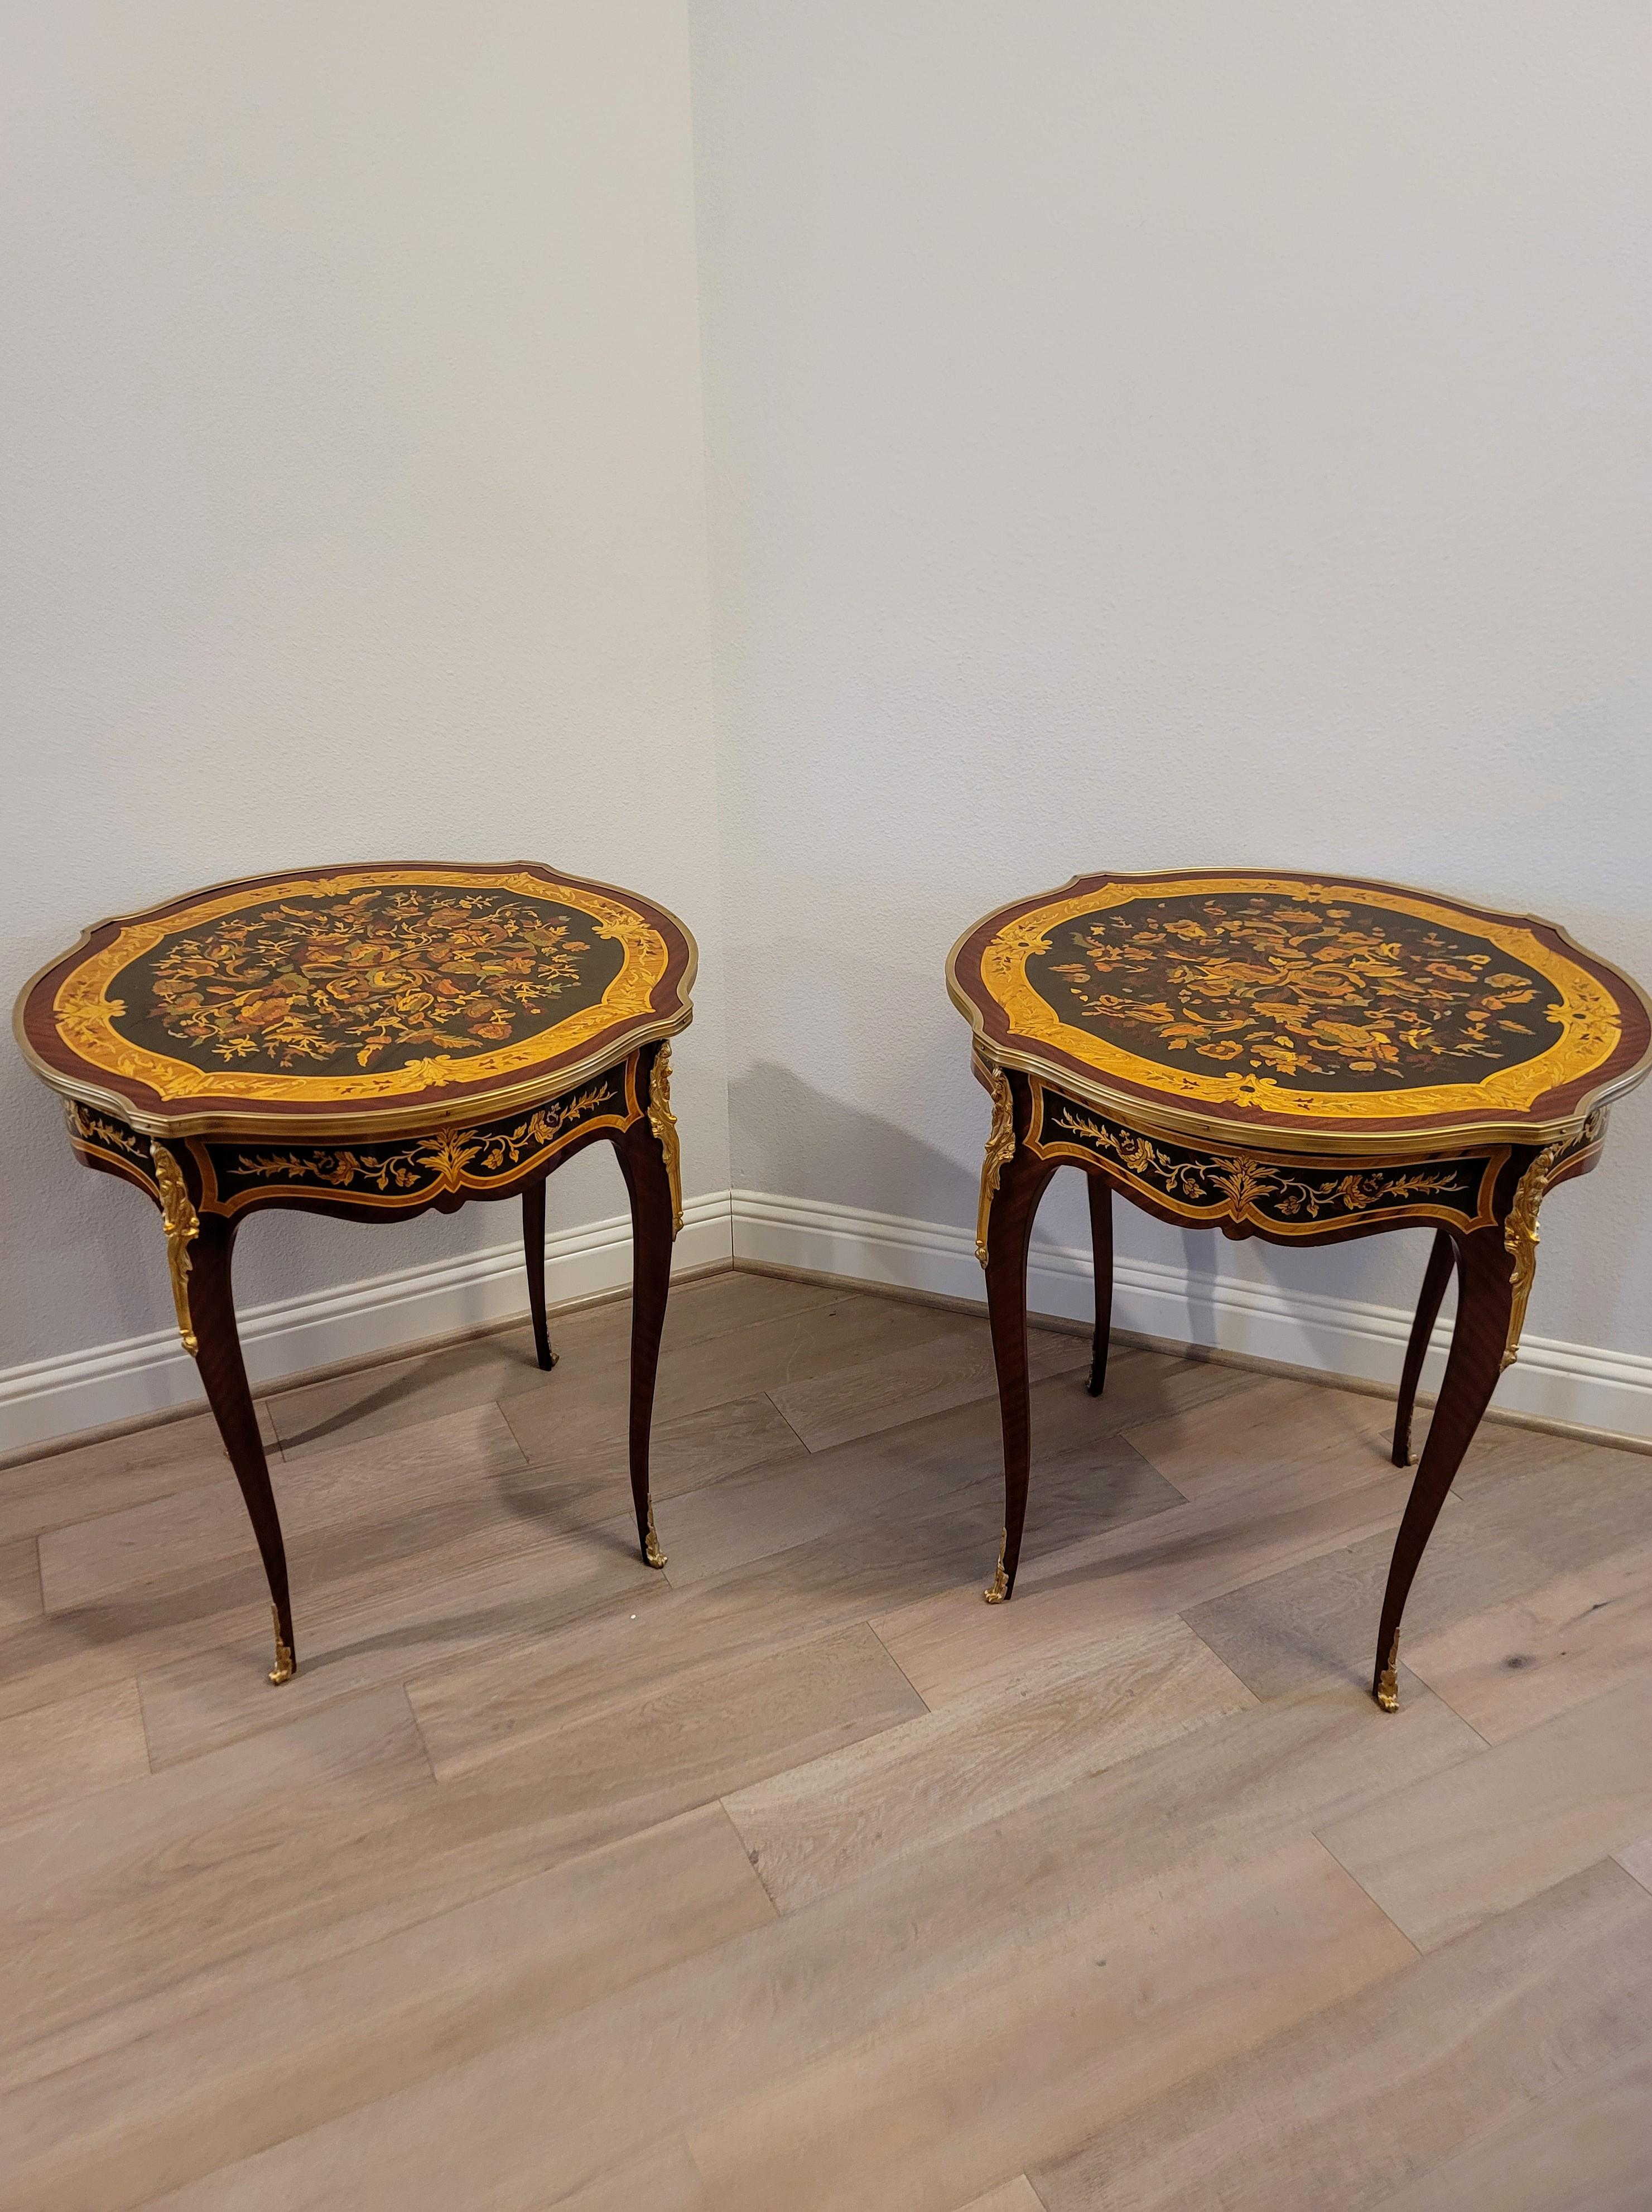 Fine Pair French Louis XV Style Gilt Bronze Mounted Floral Marquetry Side Tables For Sale 5